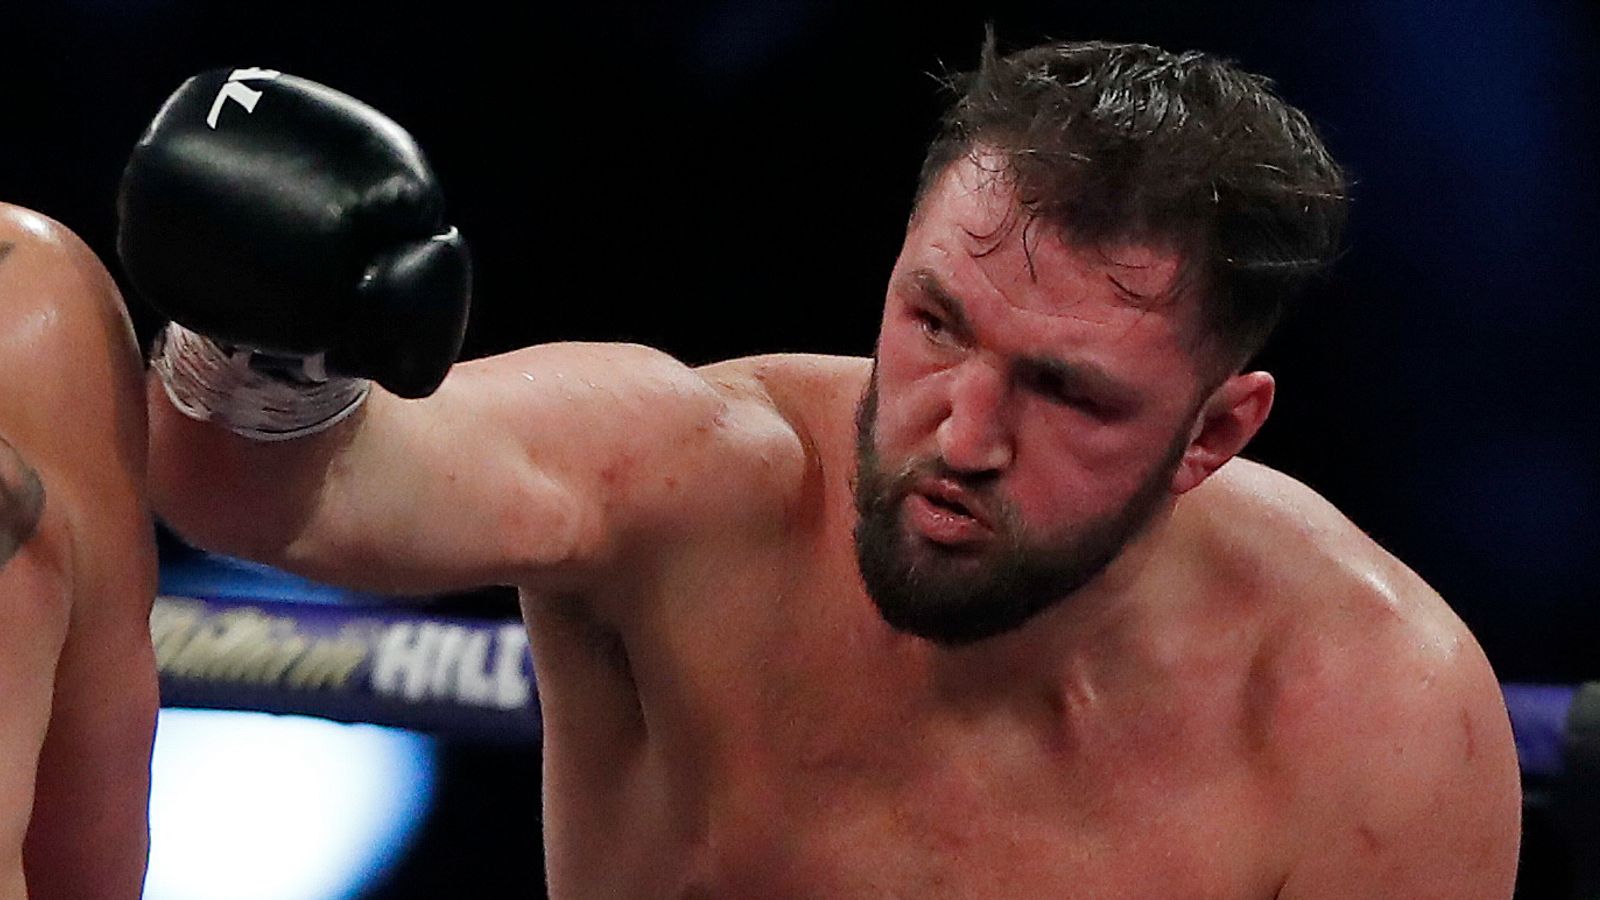 hughie-fury-pulls-out-of-birmingham-fight-with-michael-hunter-due-to-long-covid-symptoms-or-trainer-confirms-he-will-return-in-2023